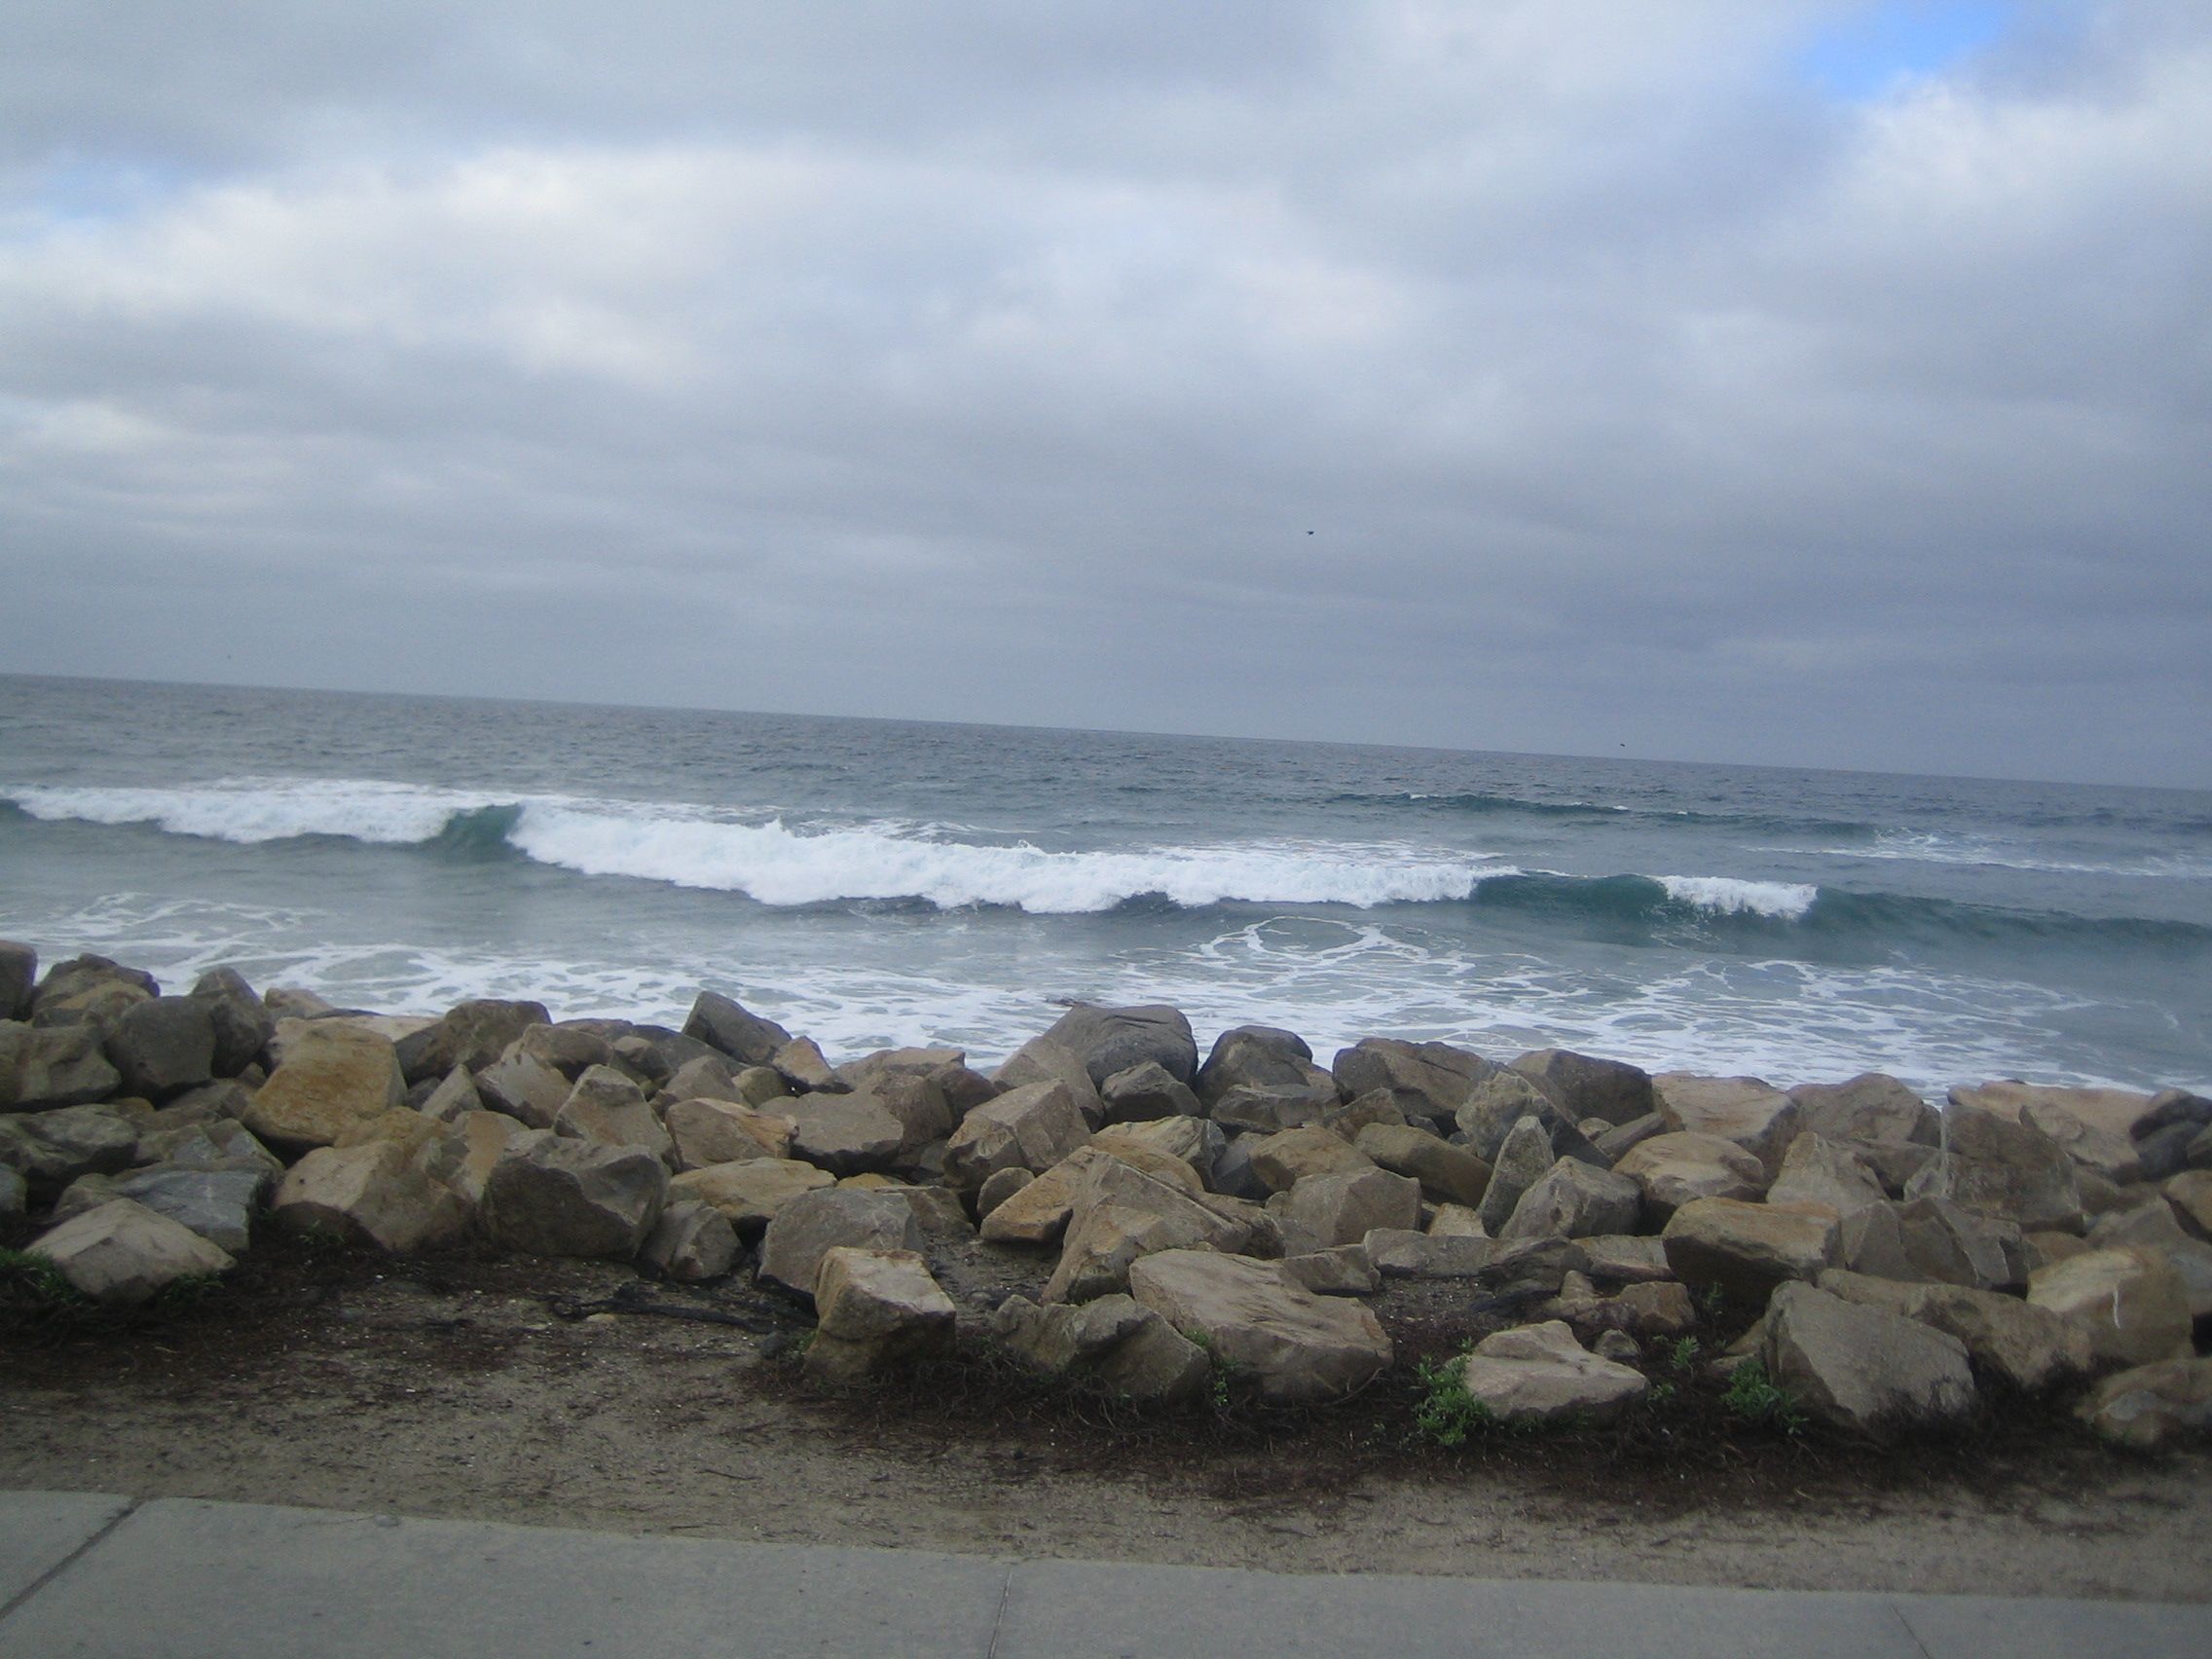 I didn't expect the sea spray to reach the road, but I loved the feel of it on my skin!